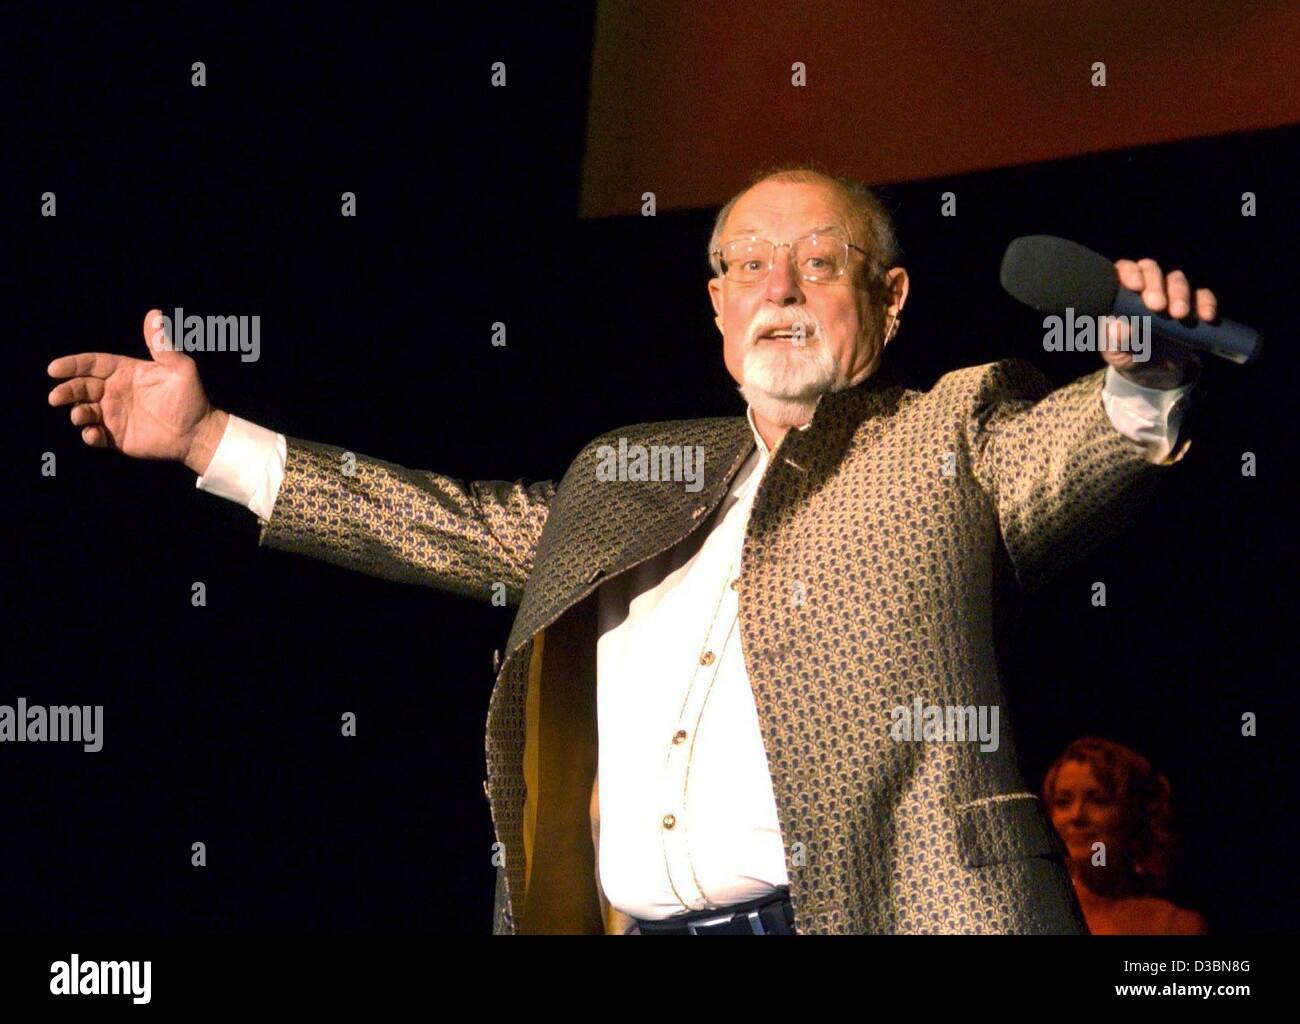 (dpa) - The British singer and entertainer Roger Whittaker stands on a stage in Suhl, Germany, 23 April 2003. After a break of three years, the 67-year-old will now tour Germany and Austria and present his new album 'mehr denn je' (more than ever). Stock Photo